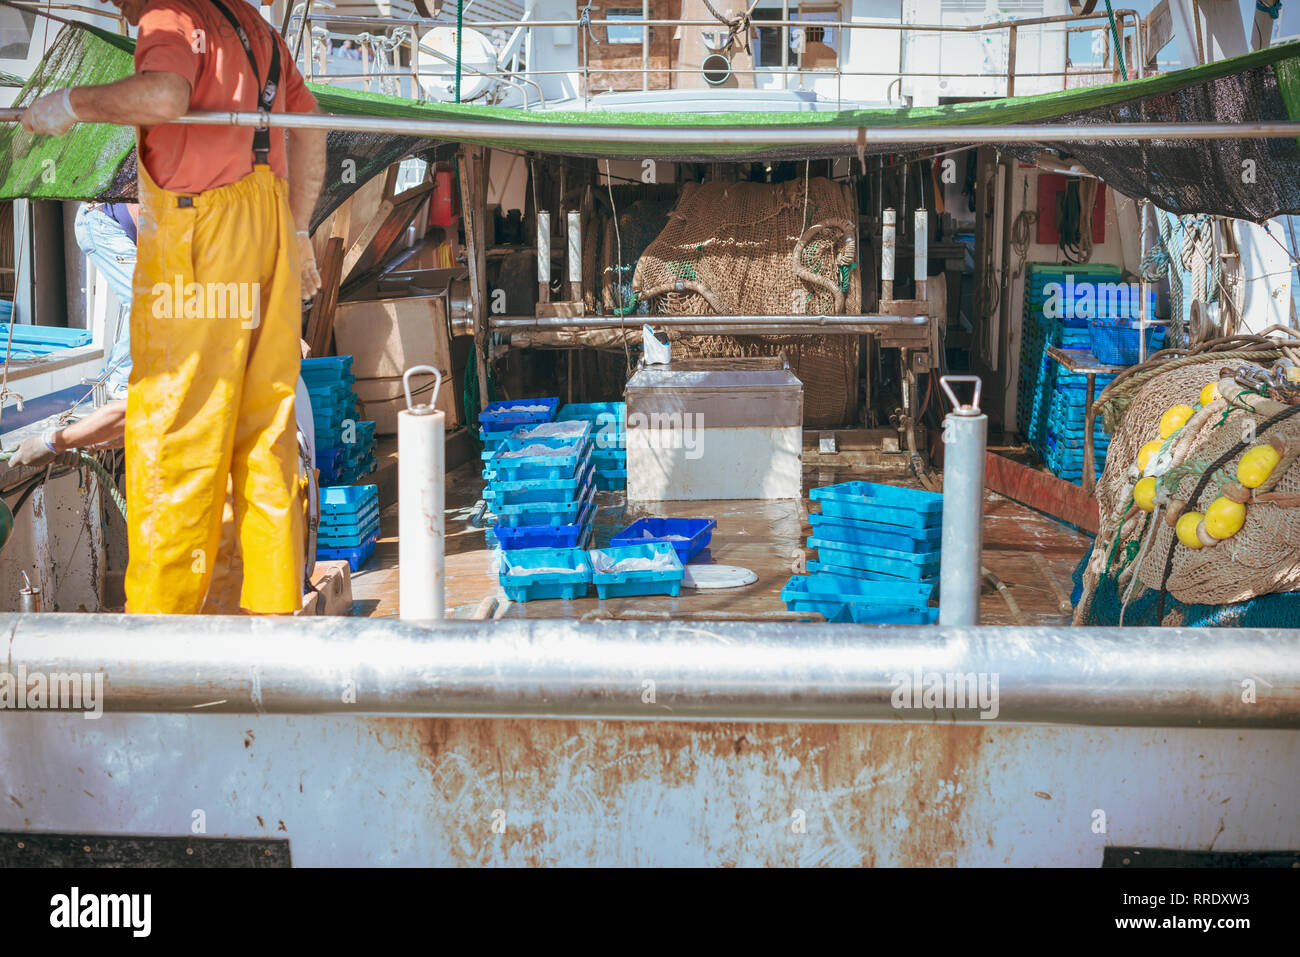 A fisherman wearing yellow overalls tidies up equipment on the deck of a fishing trawler at the port in Denia, Spain. Stock Photo